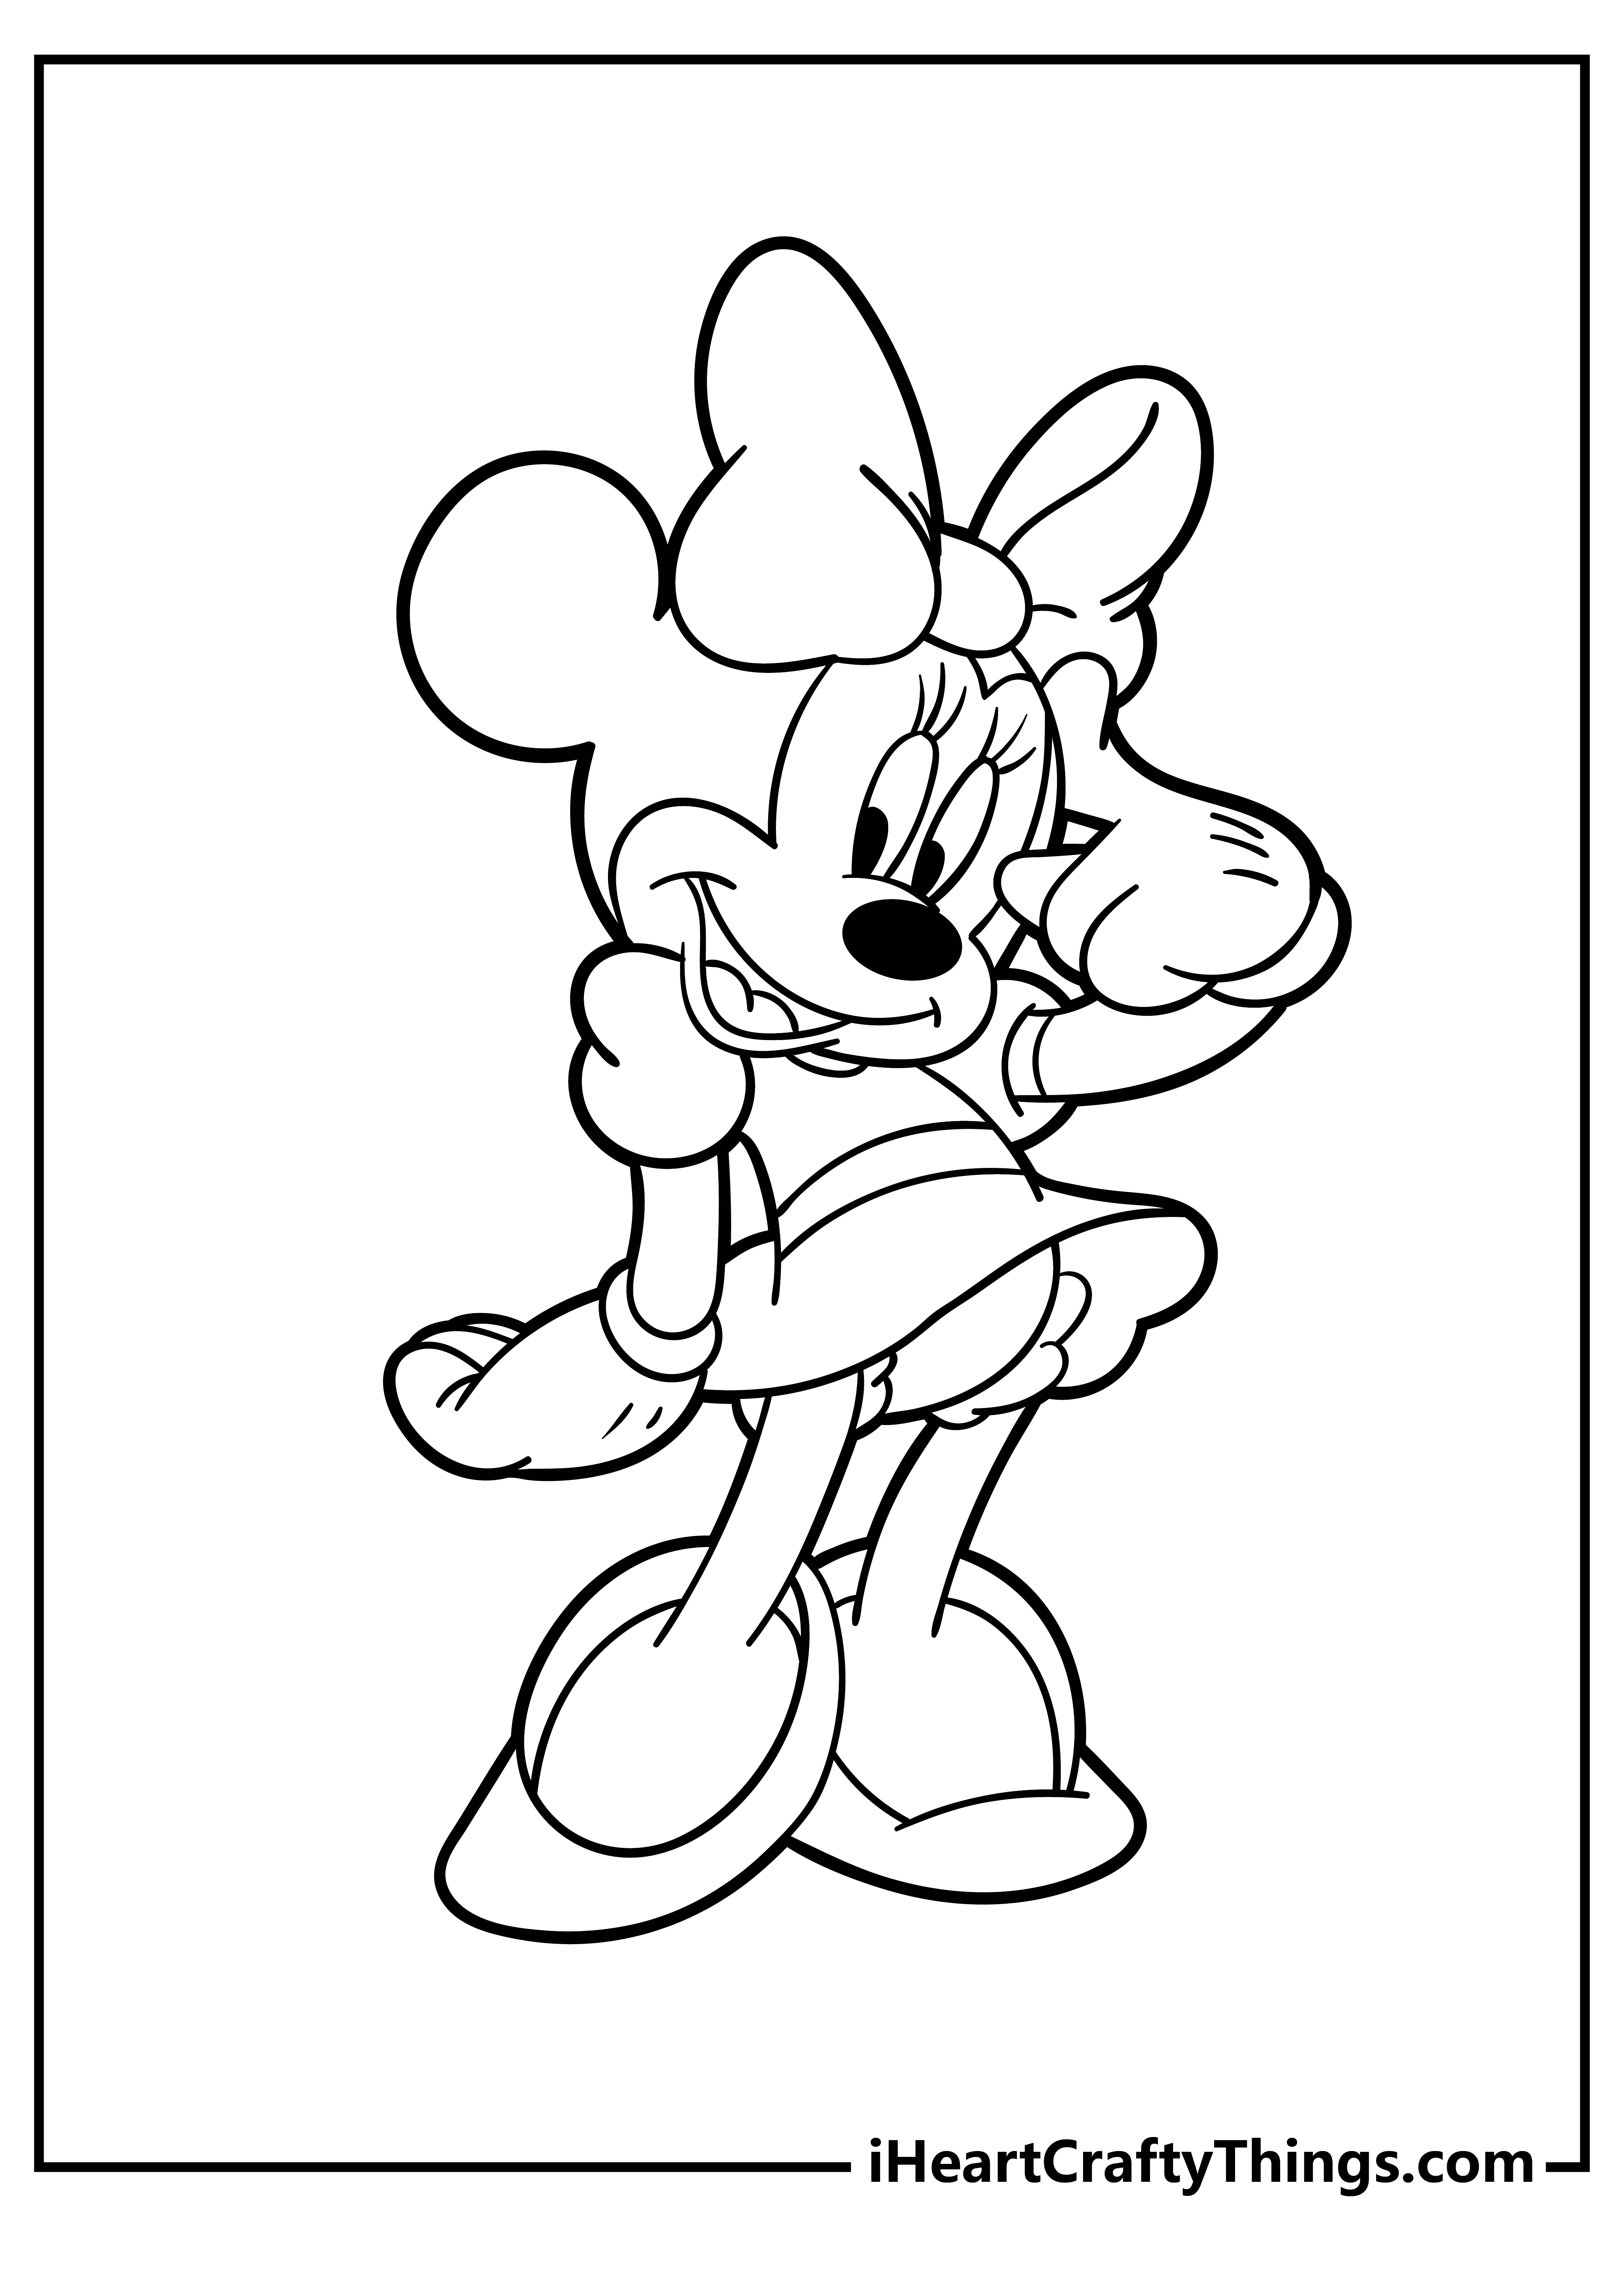 Minnie Mouse Coloring Pages for preschoolers free printable